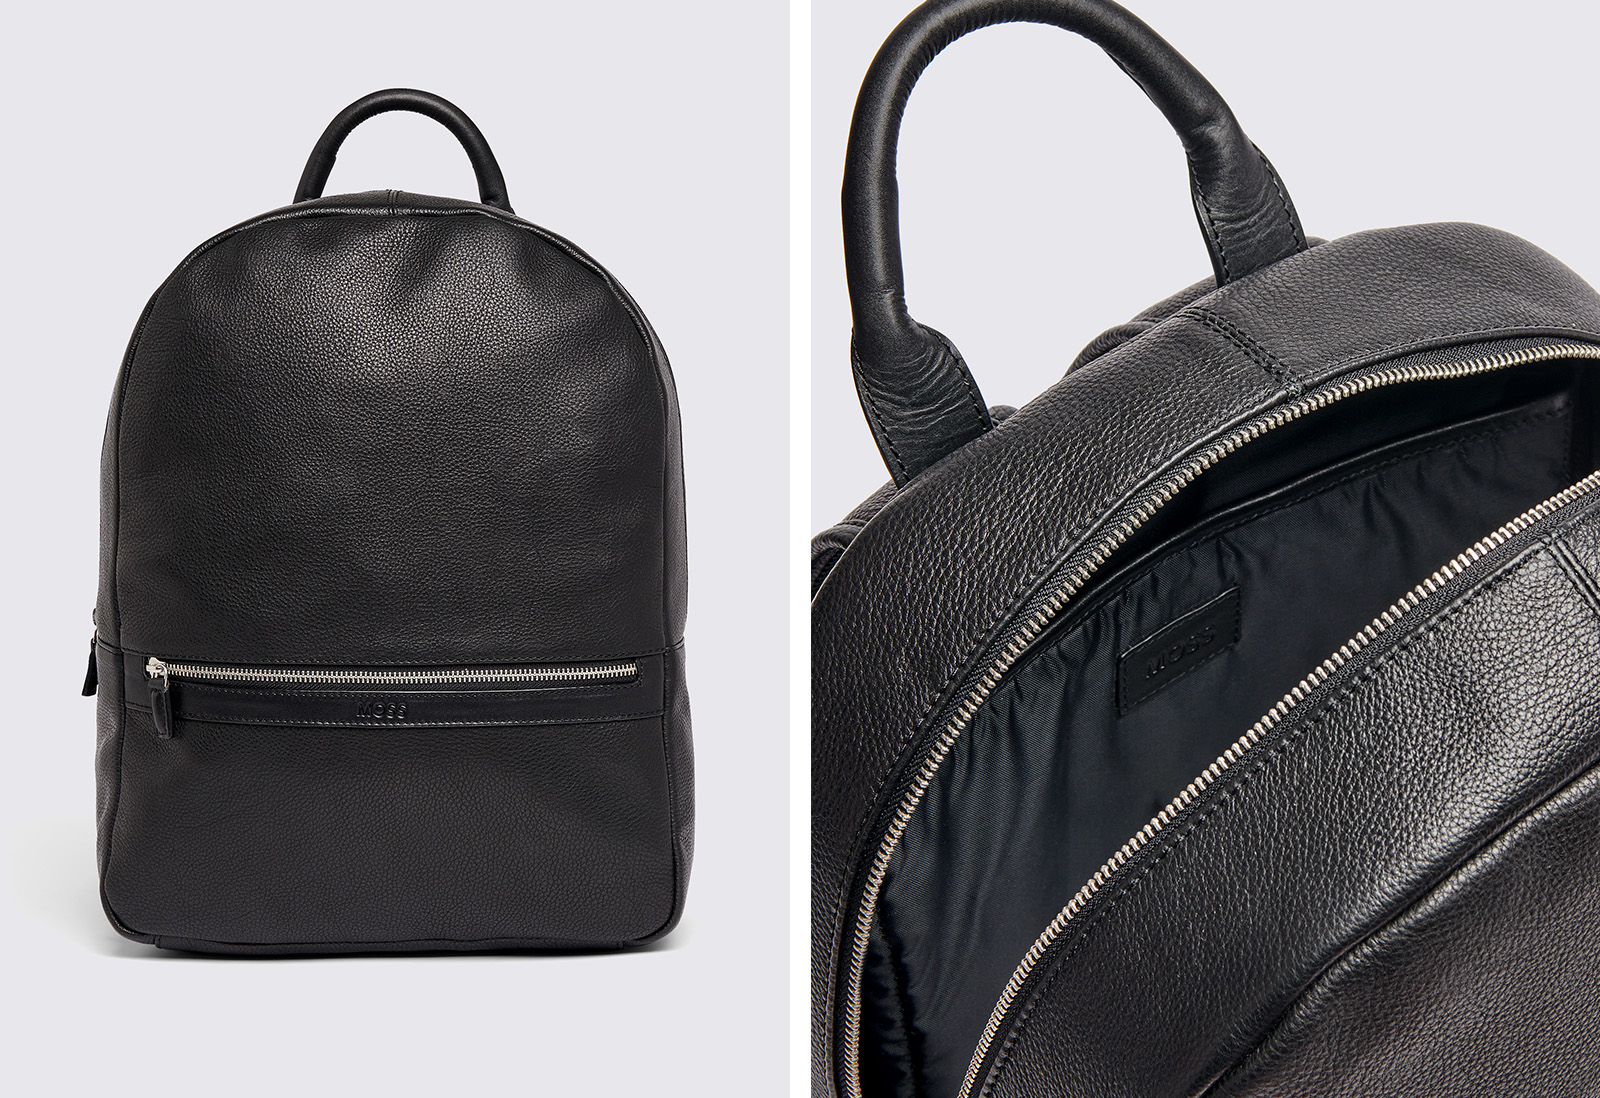 Moss - black grained leather backpack